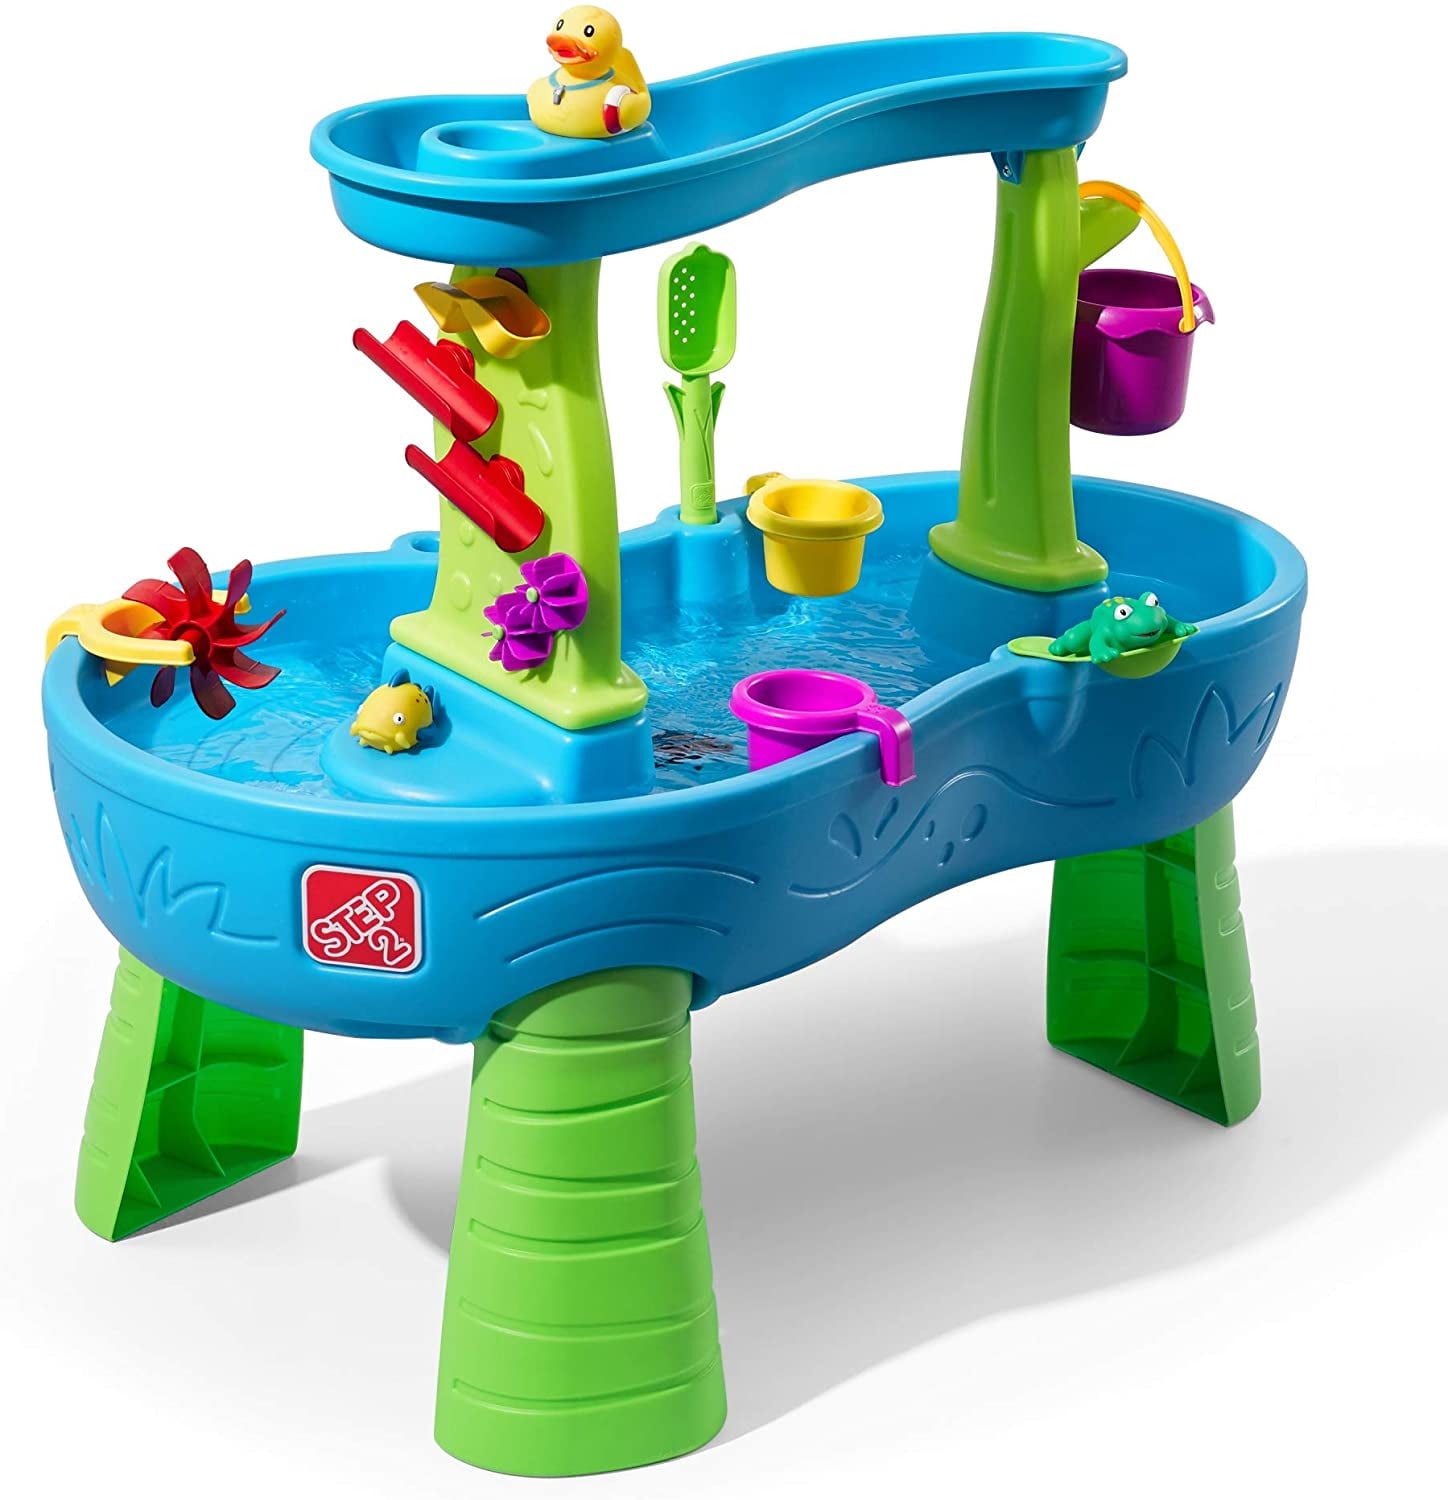 13-Piece Accessories Essential for Playing in The Water Children's Water Table Shower Splash Pool 